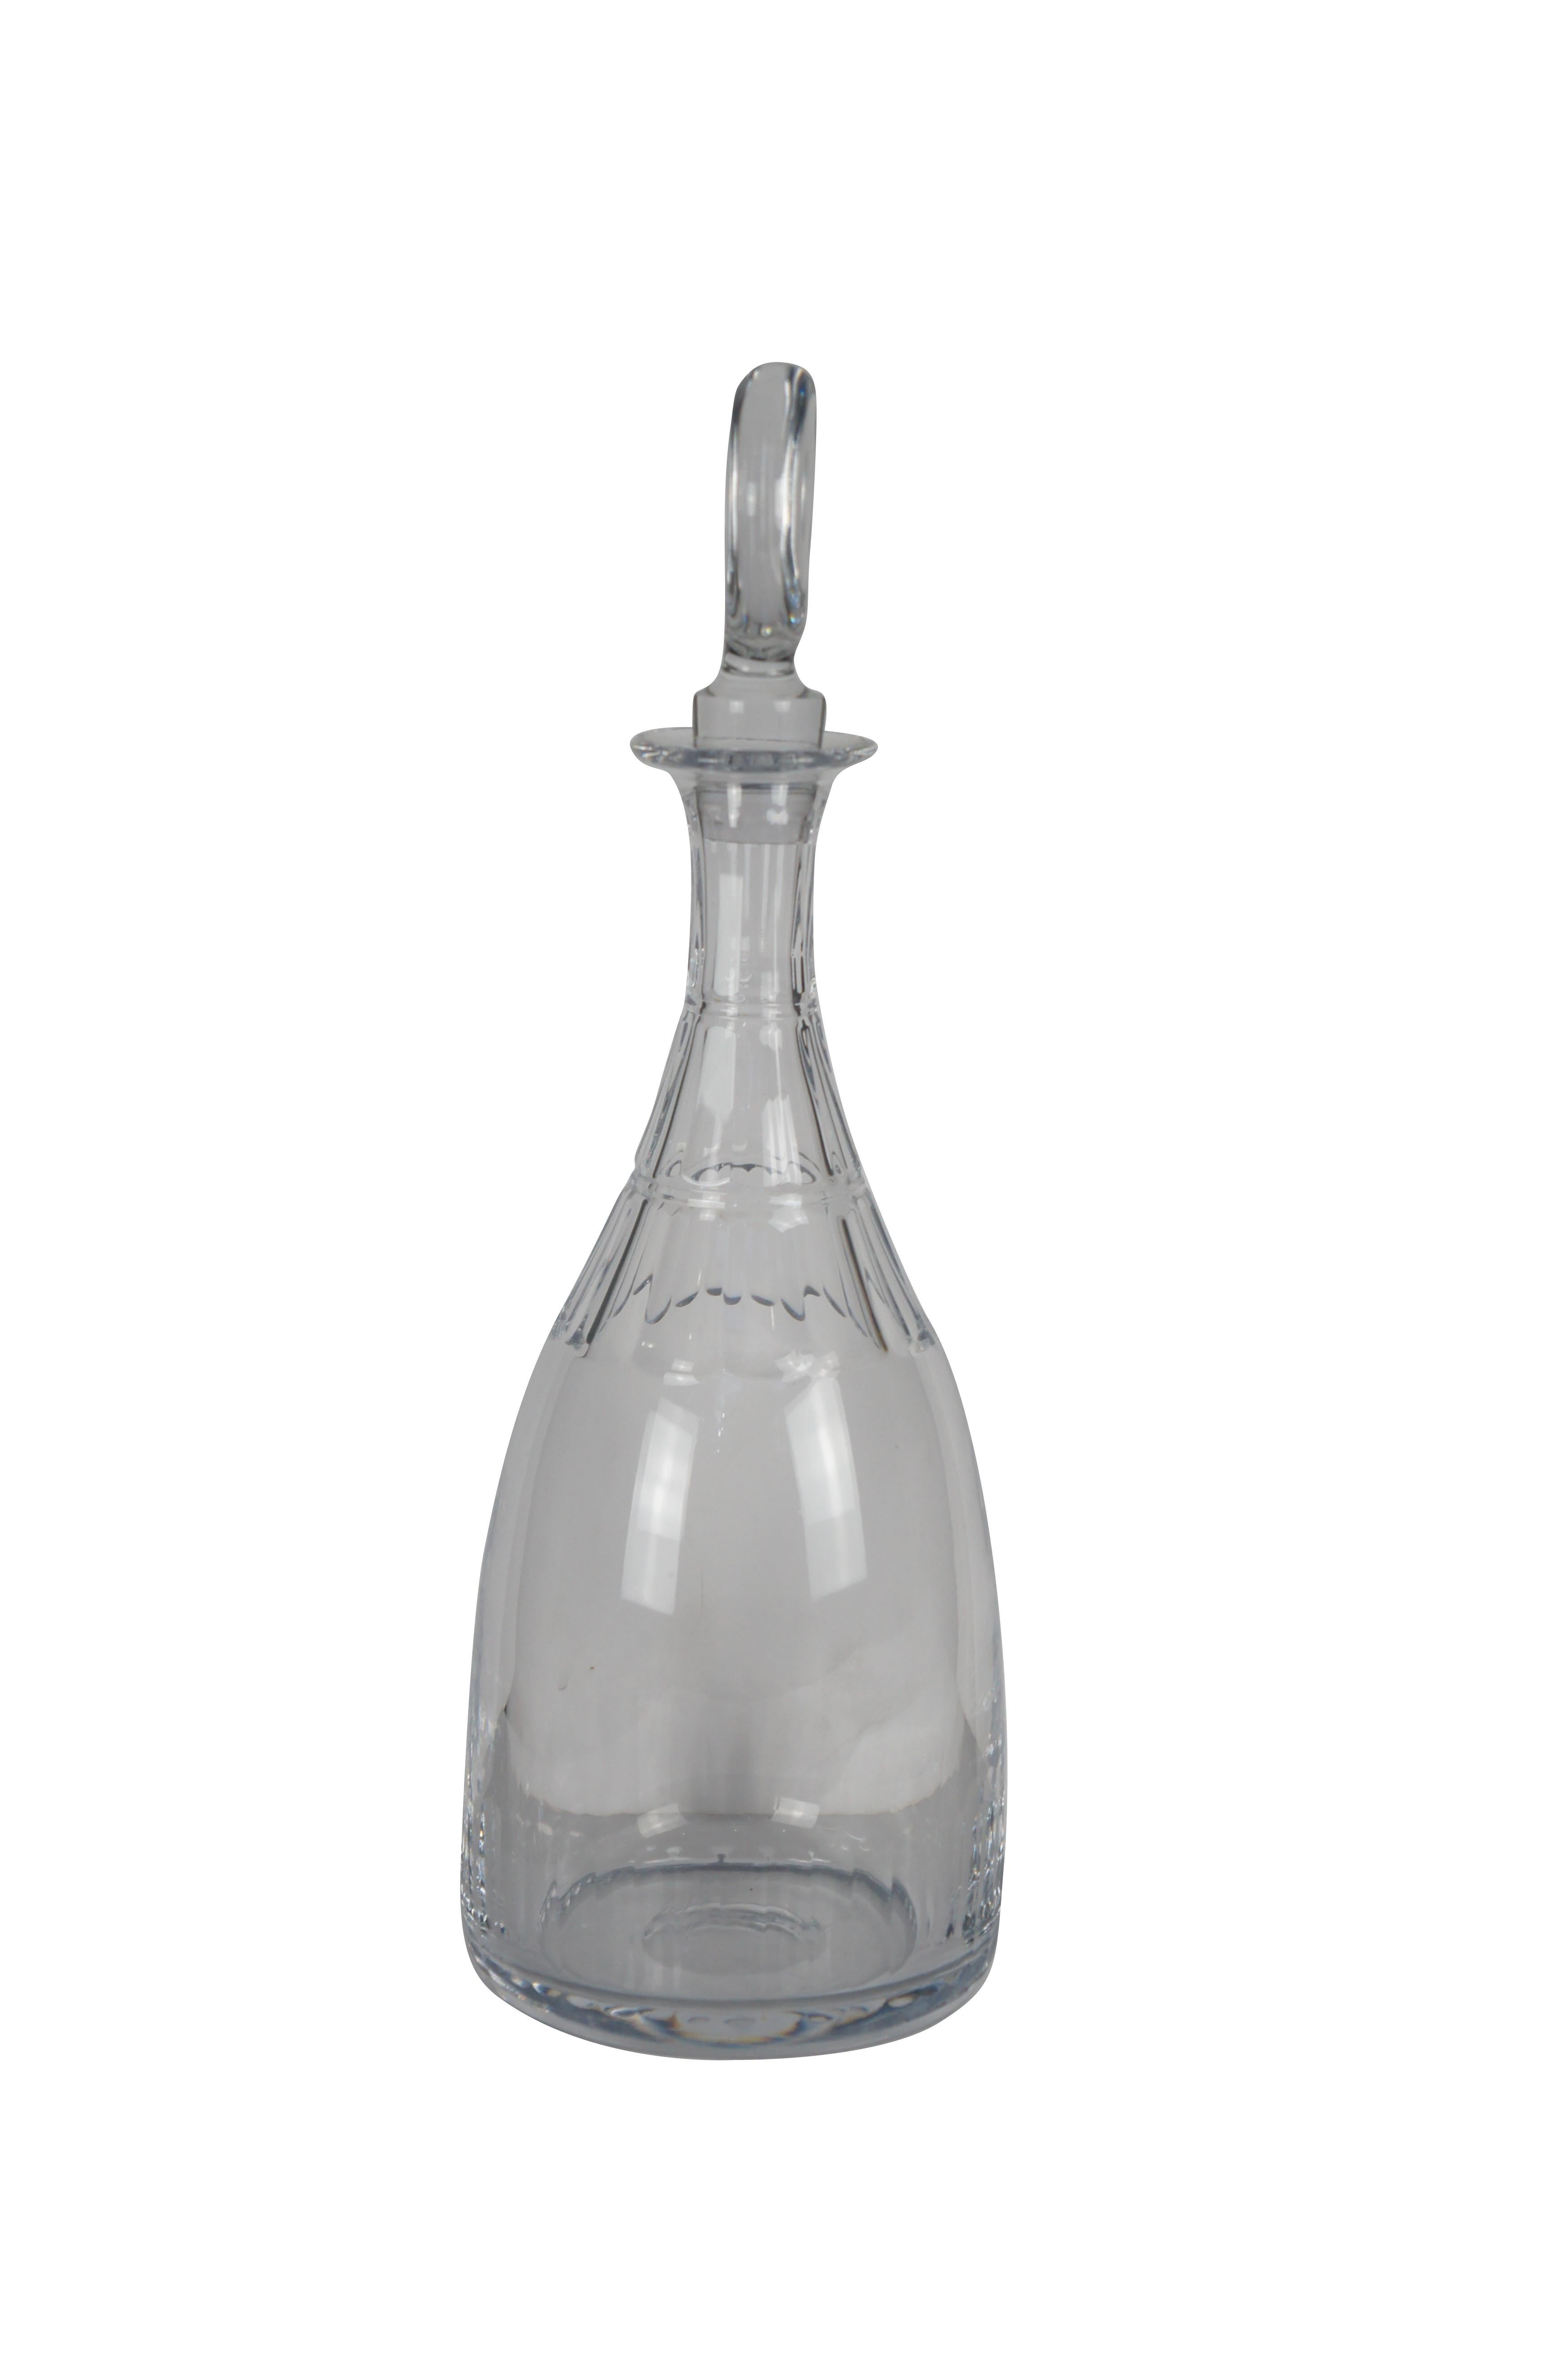 The William Yeoward Nancy Decanter is a clear, handmade crystal decanter with flat cuts and a capacity of 800 ml. It is part of the Nancy collection and measures 16 in with stopper. The decanter is inspired by a Georgian original and is well-suited